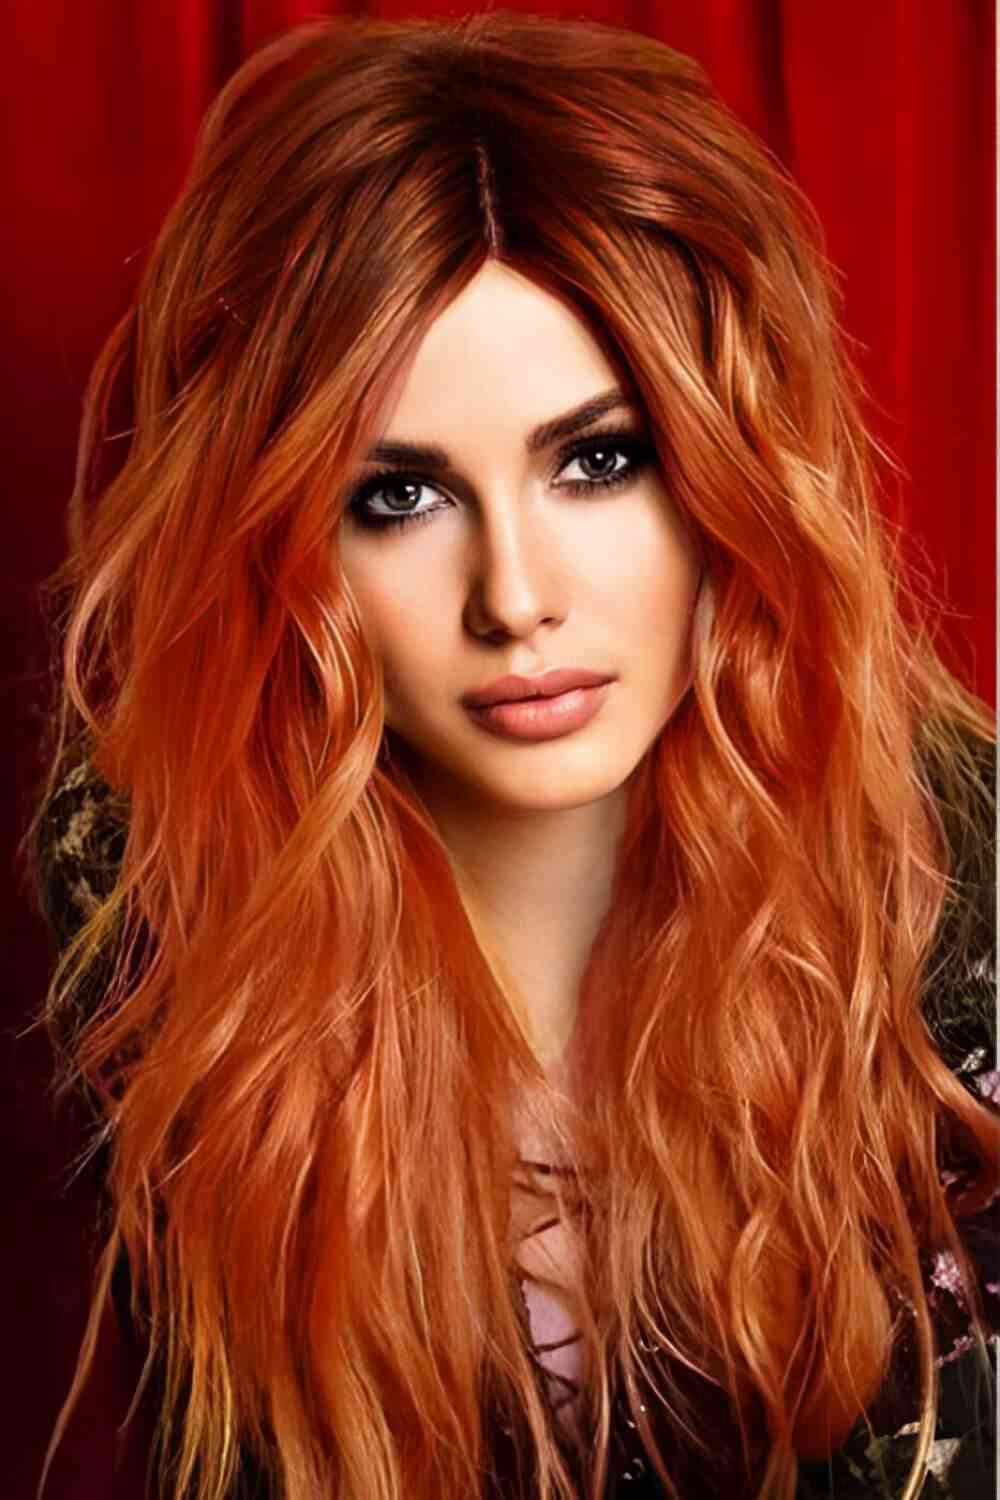 13*2" Lace Front Wigs Synthetic Long Wave 24" 150% Density - lolaluxeshop